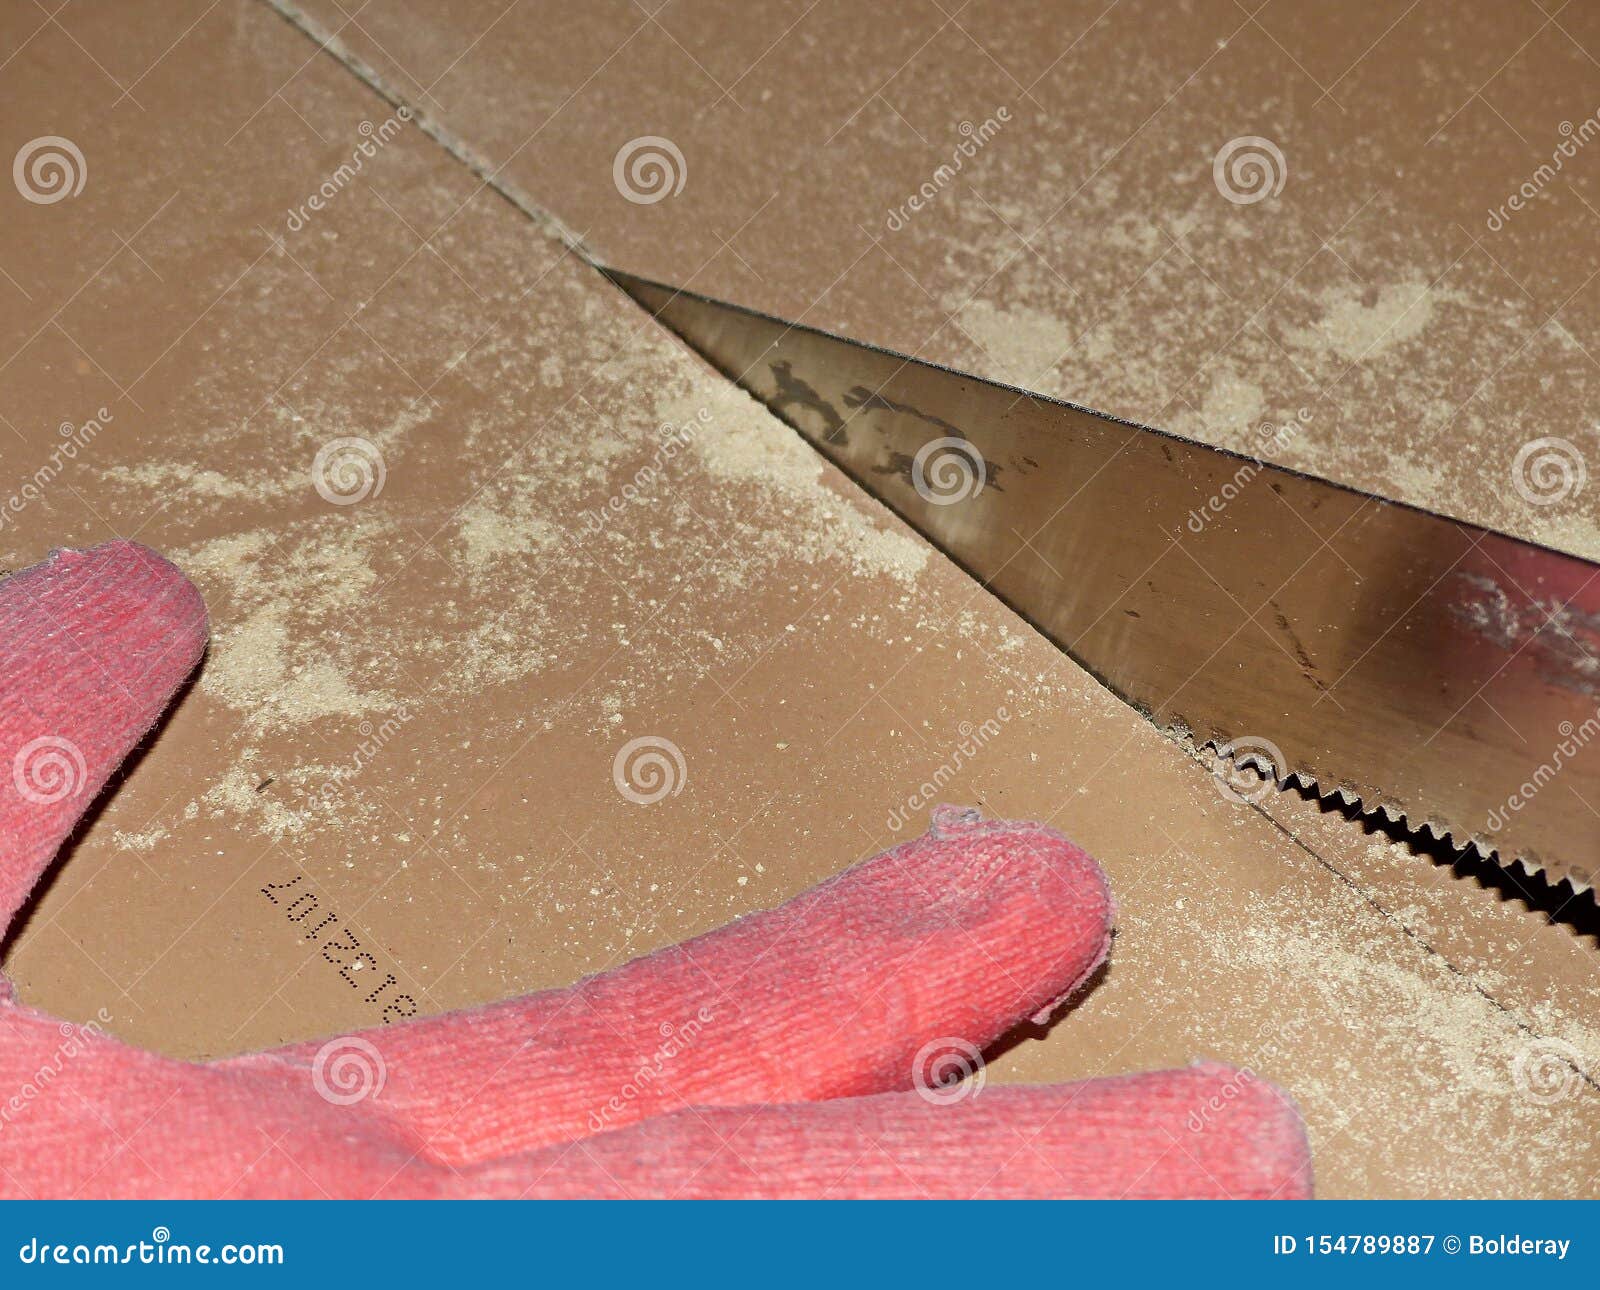 Cut The Laminate By Hand With A Small Hacksaw The Sheet Of A Hand